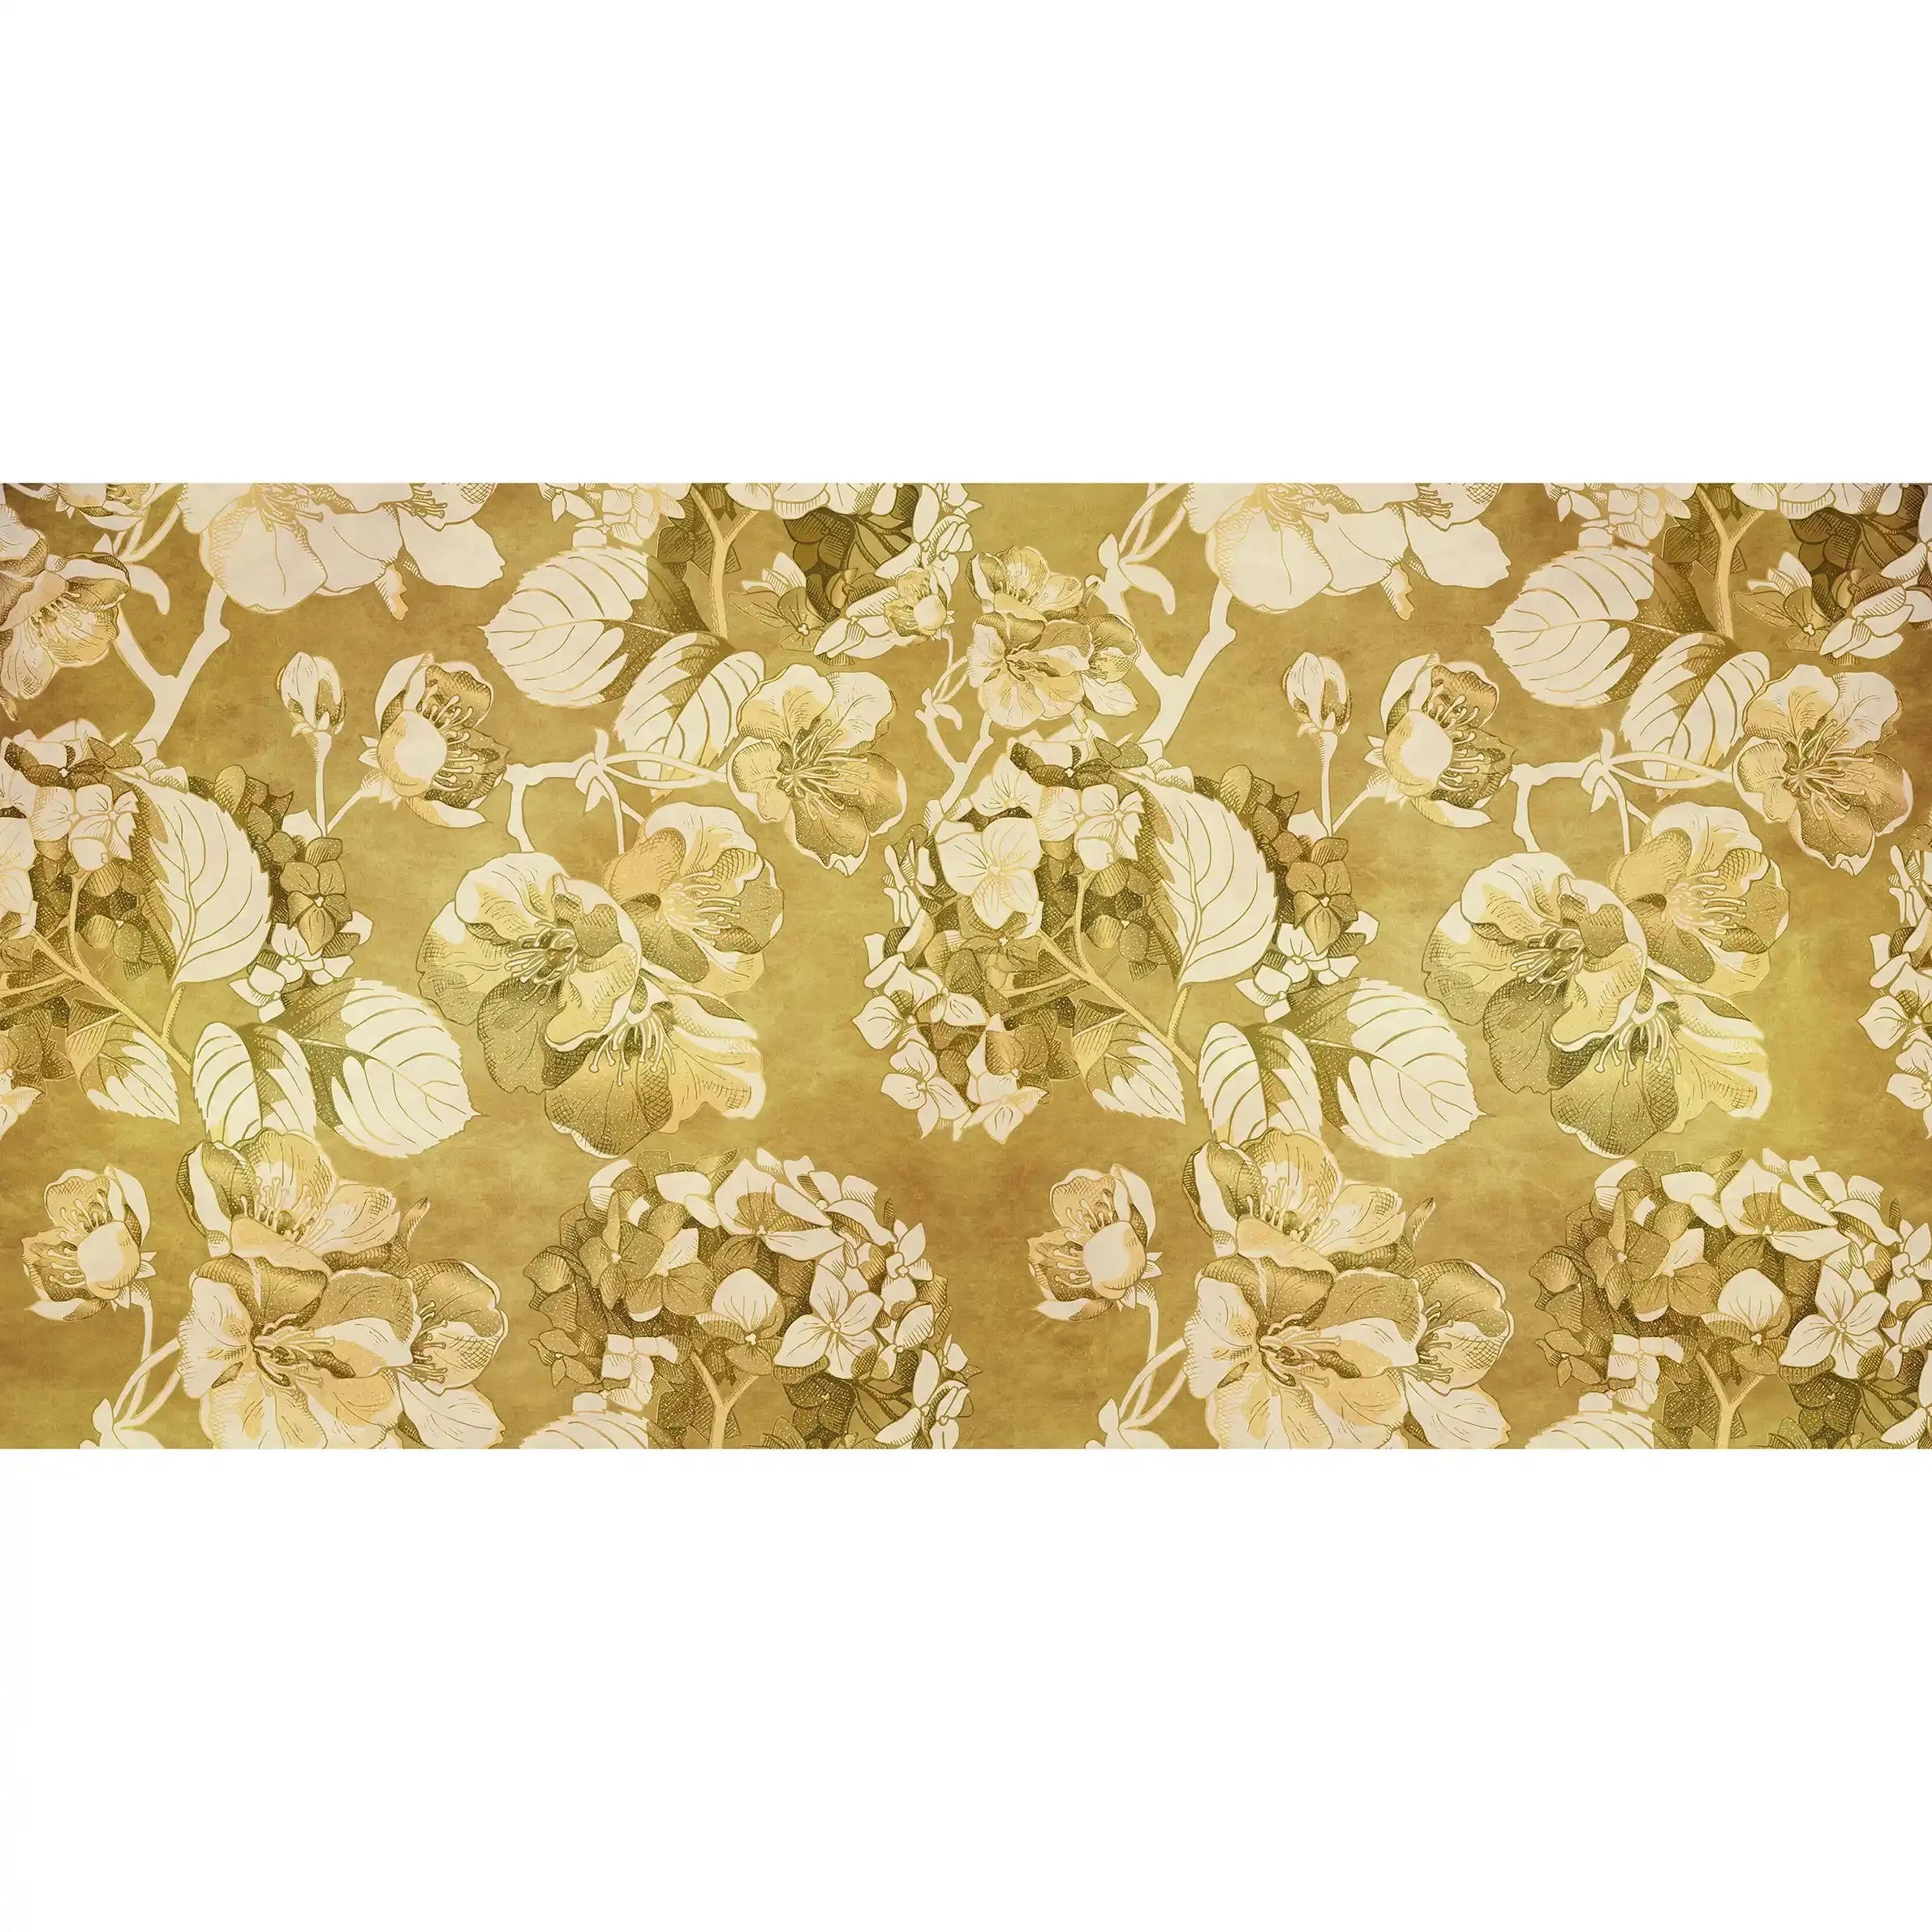 3036-C / Vintage Floral Mural Wallpaper: Yellow and Beige Art Style, Easy Install for Accent Wall Decor and Bathroom - Artevella